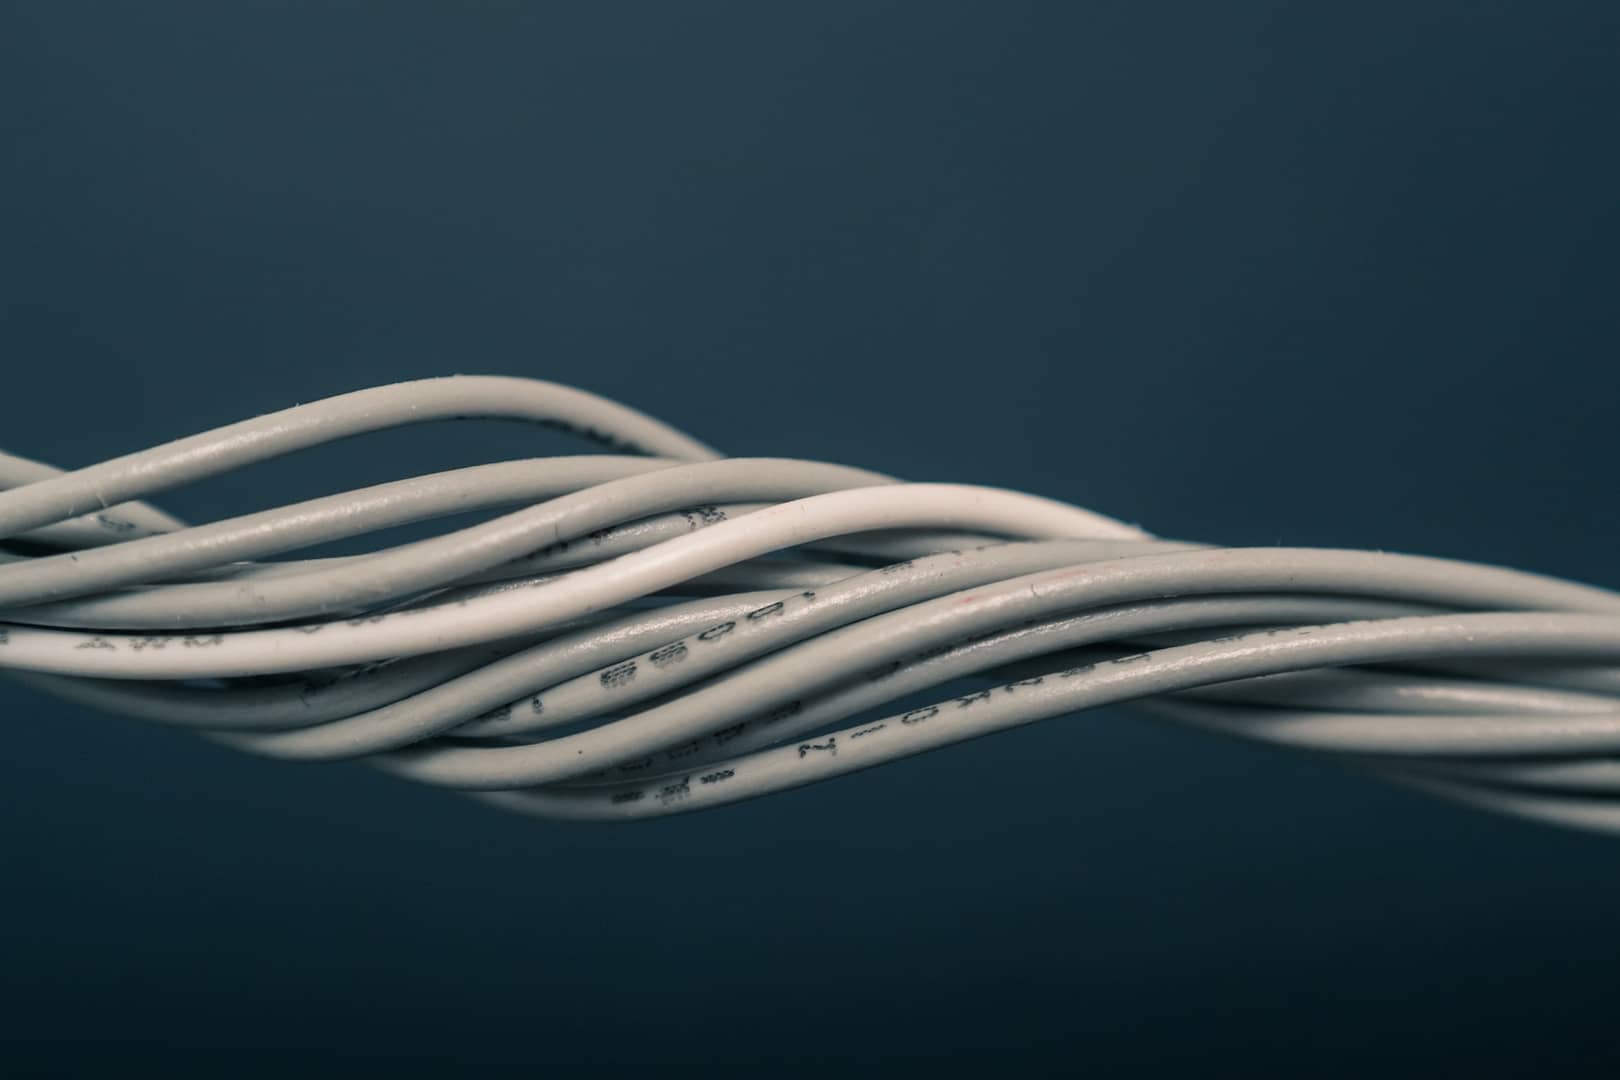 A collection of white cables